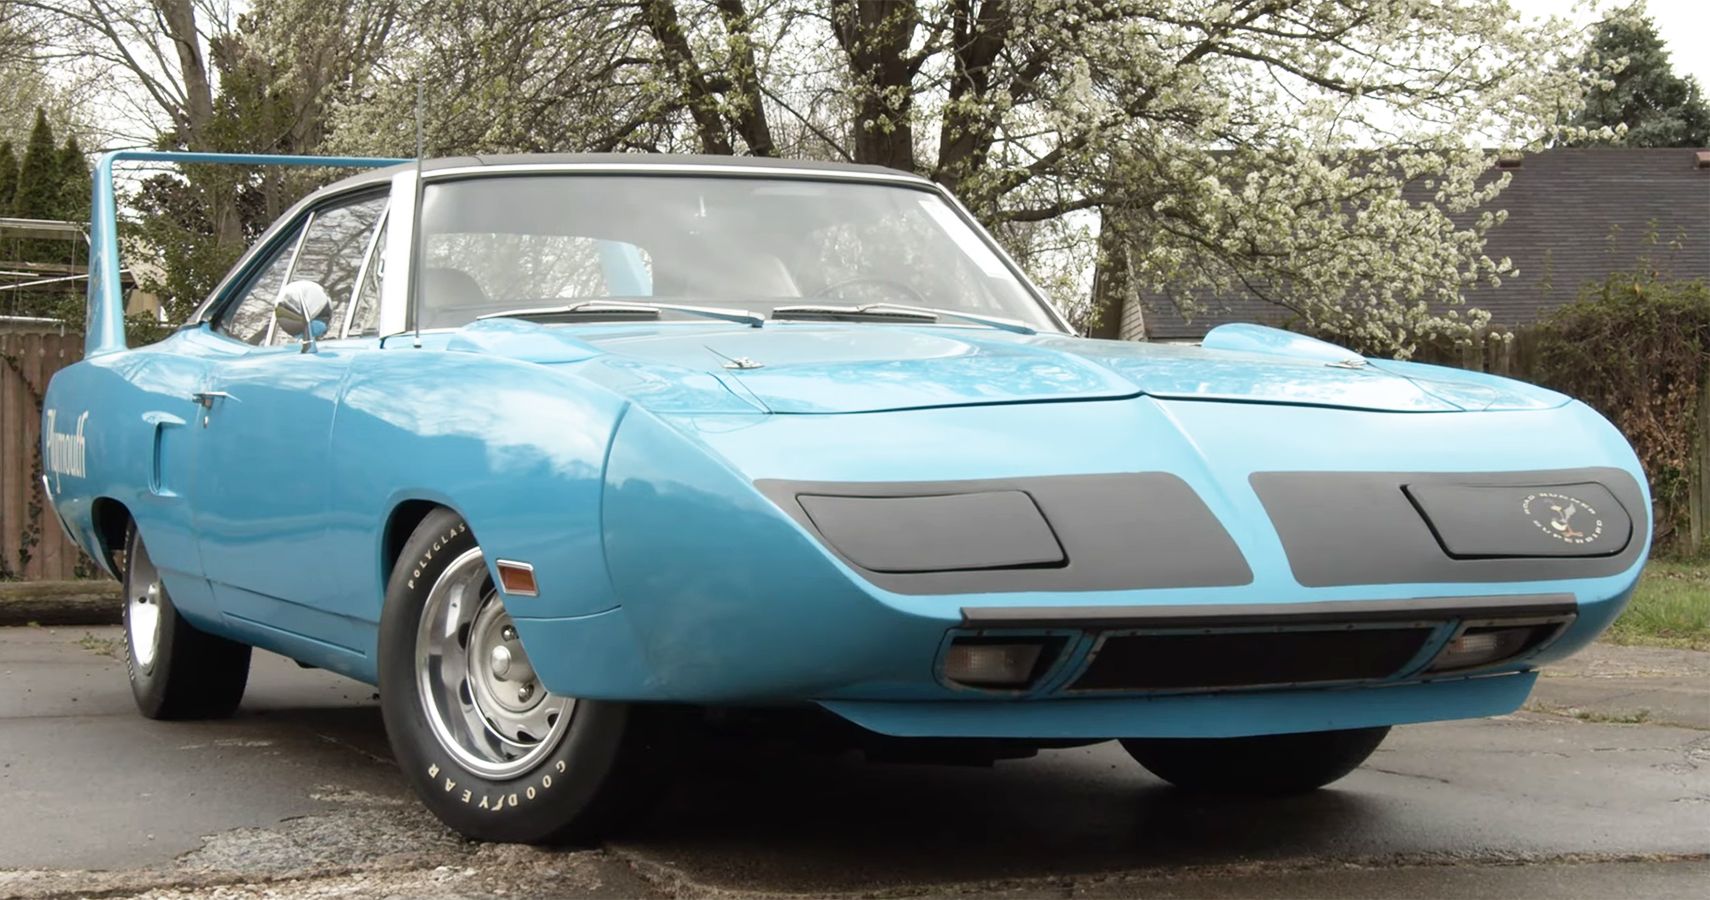 Petty Blue 1970 Plymouth Superbird front view